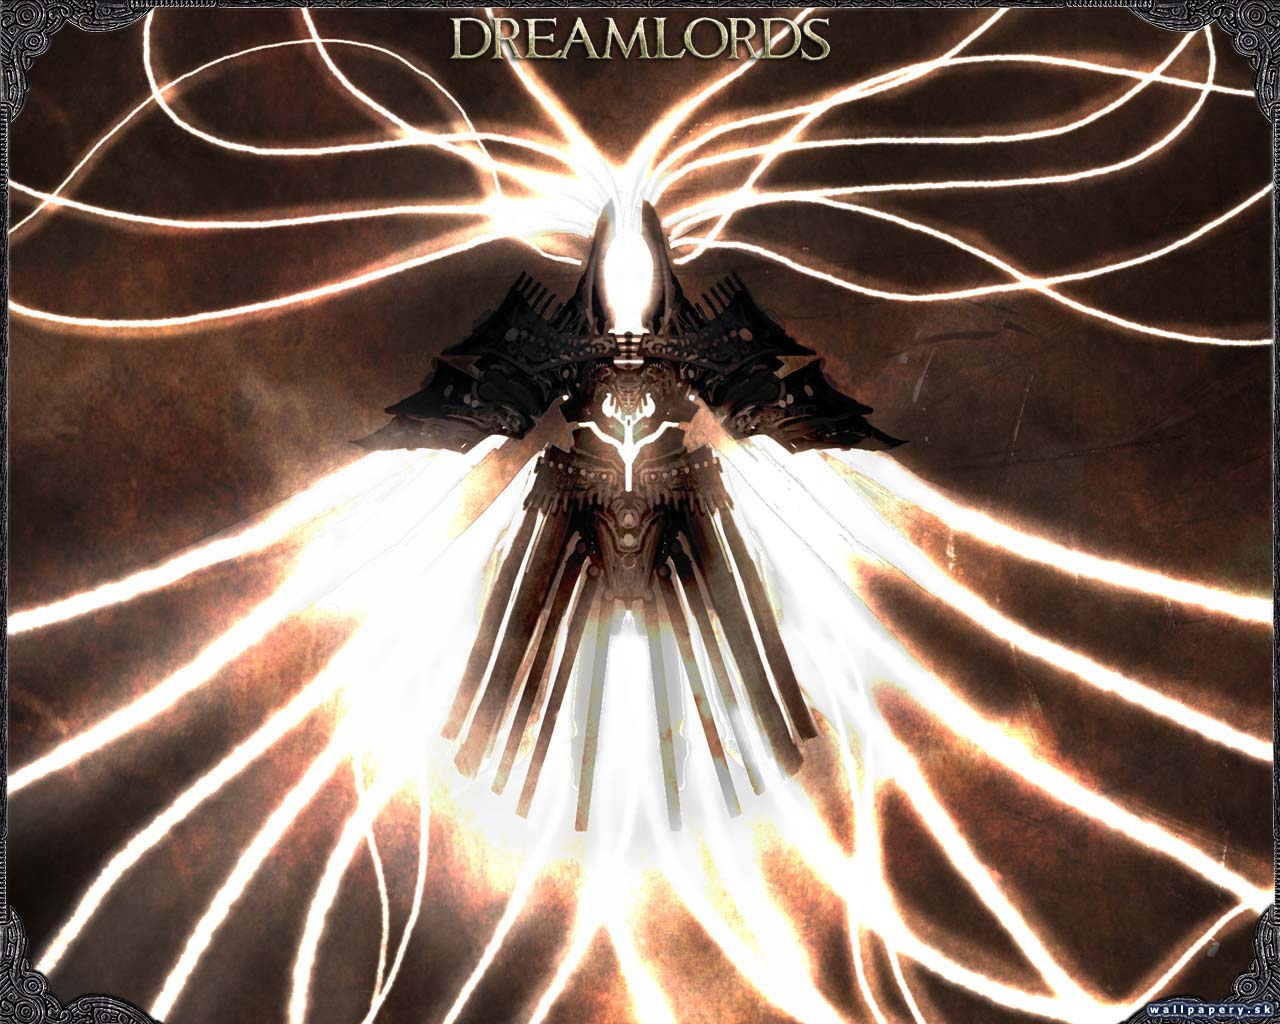 Dreamlords - wallpaper 11